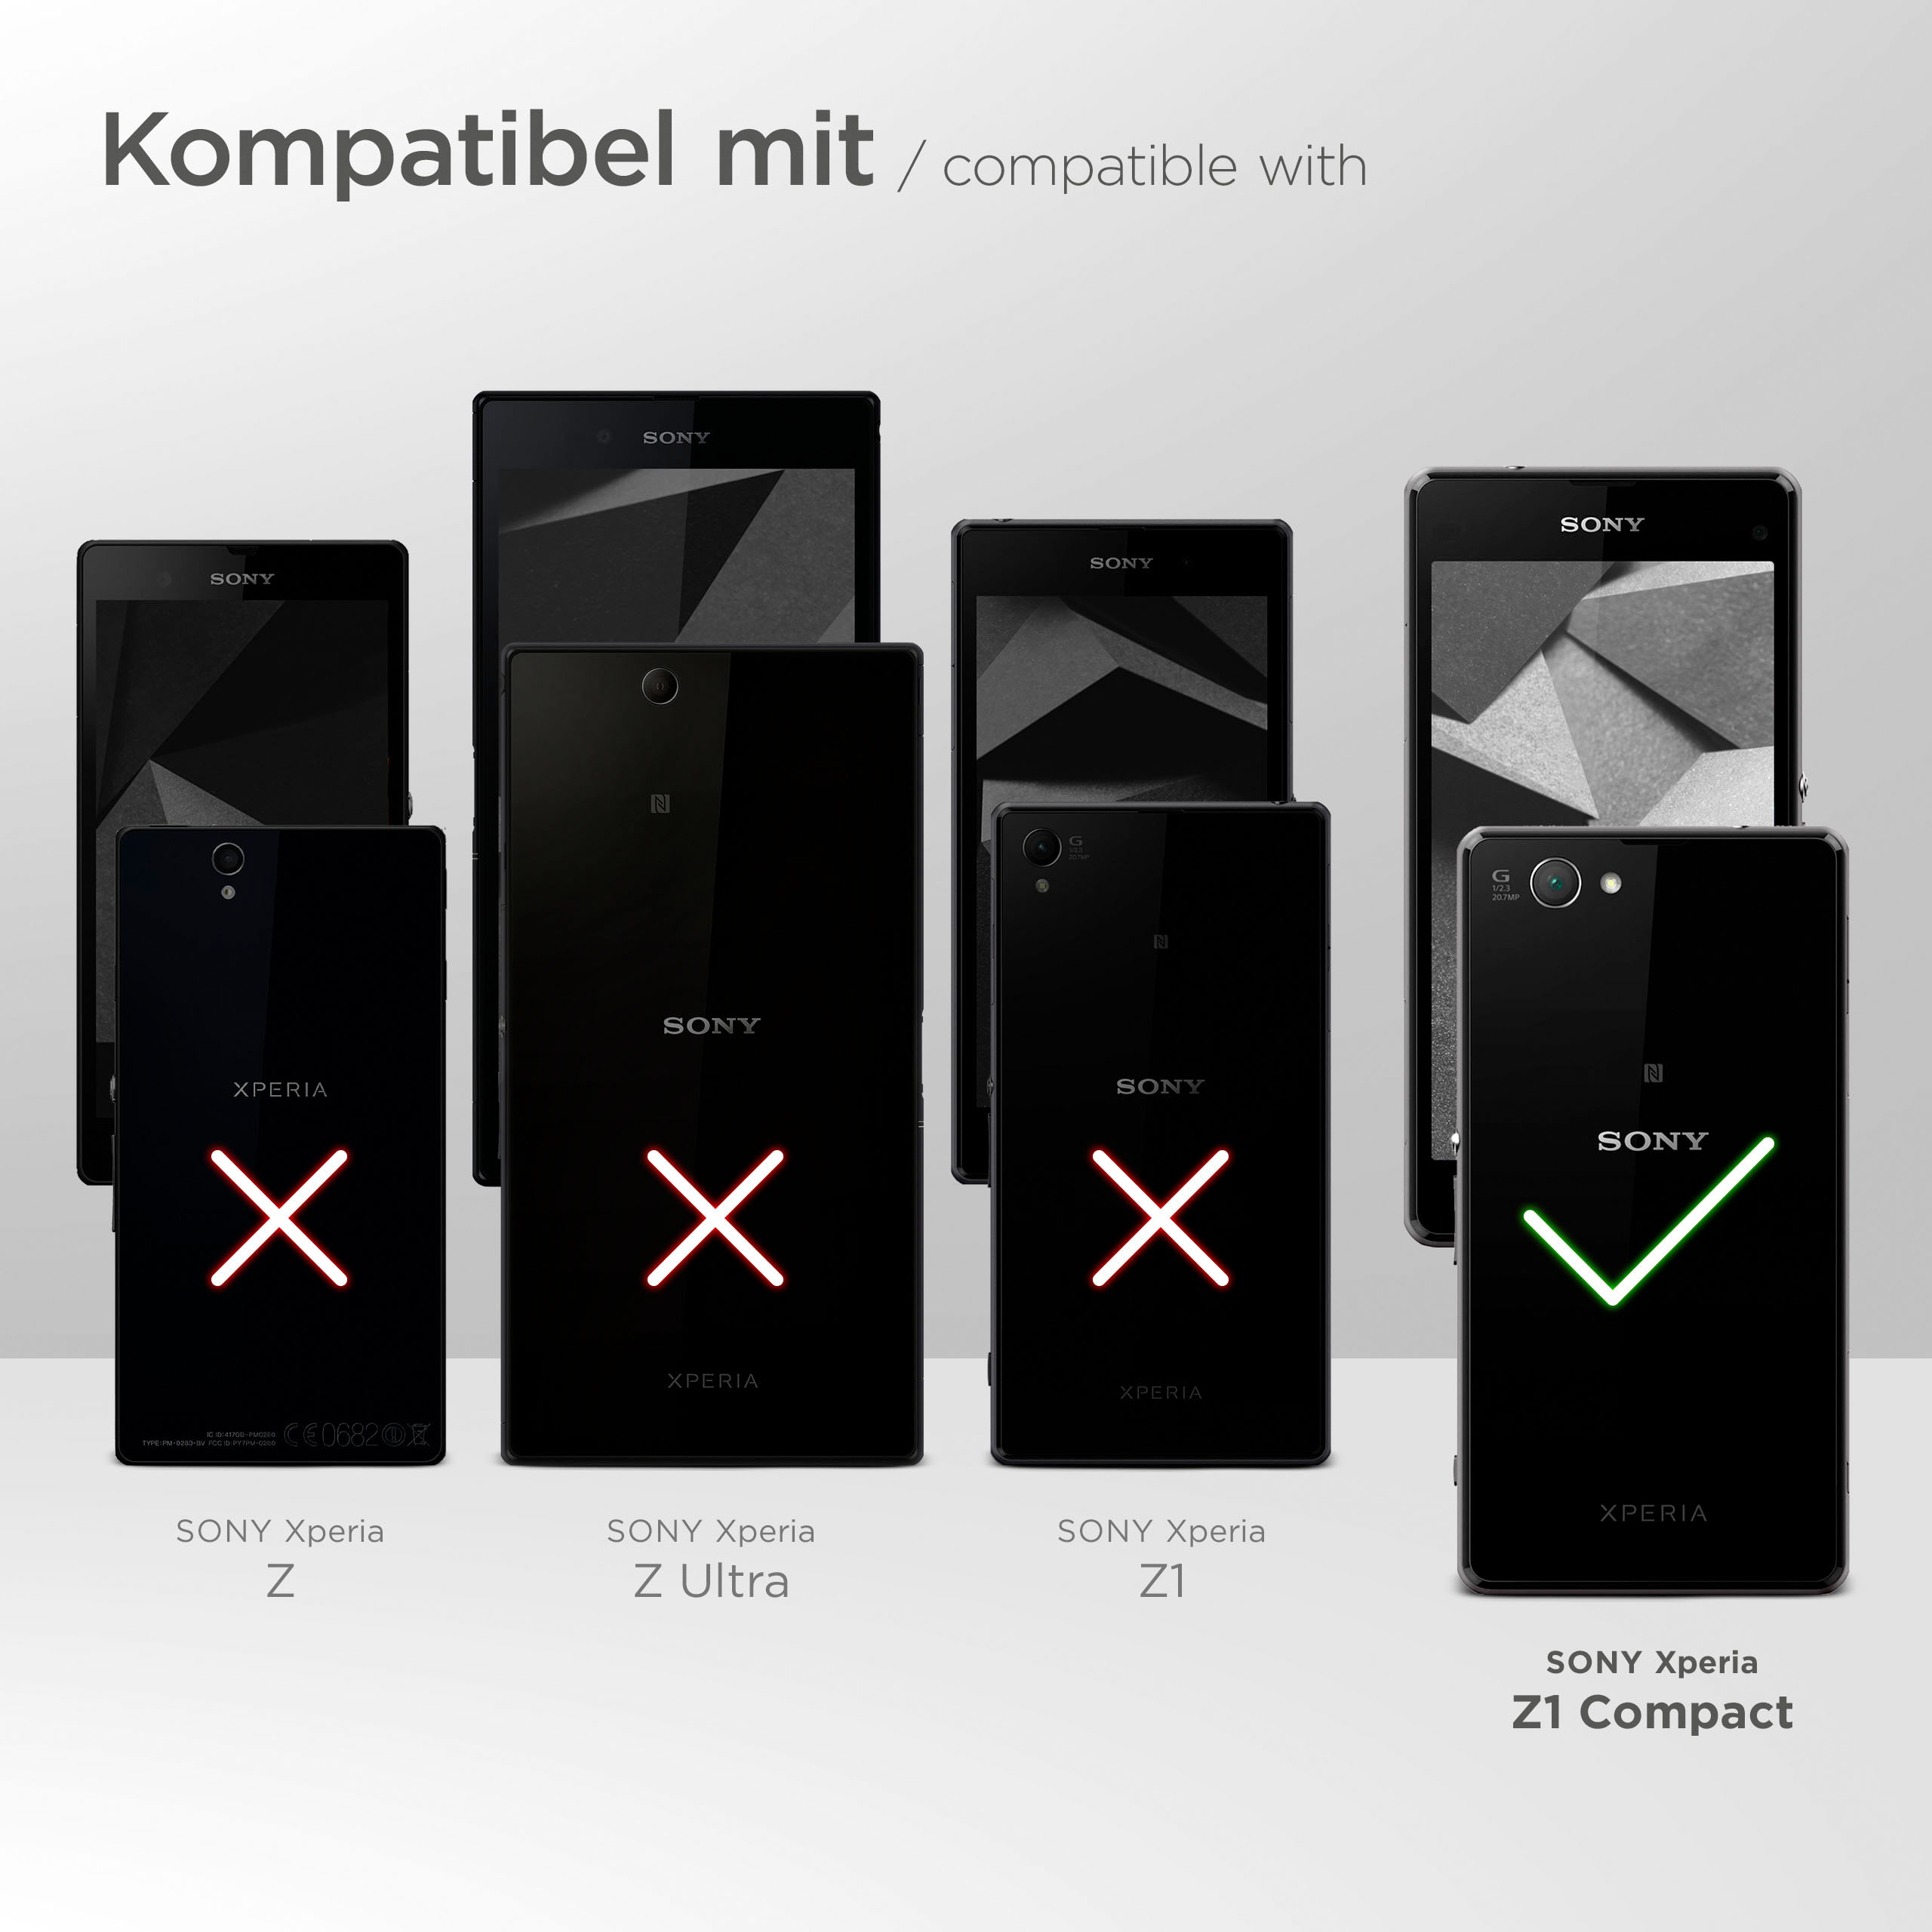 Compact, Xperia Full ONEFLOW Z1 Sony, Dunkelrot Einsteckhülle mit Cover, Zuglasche,